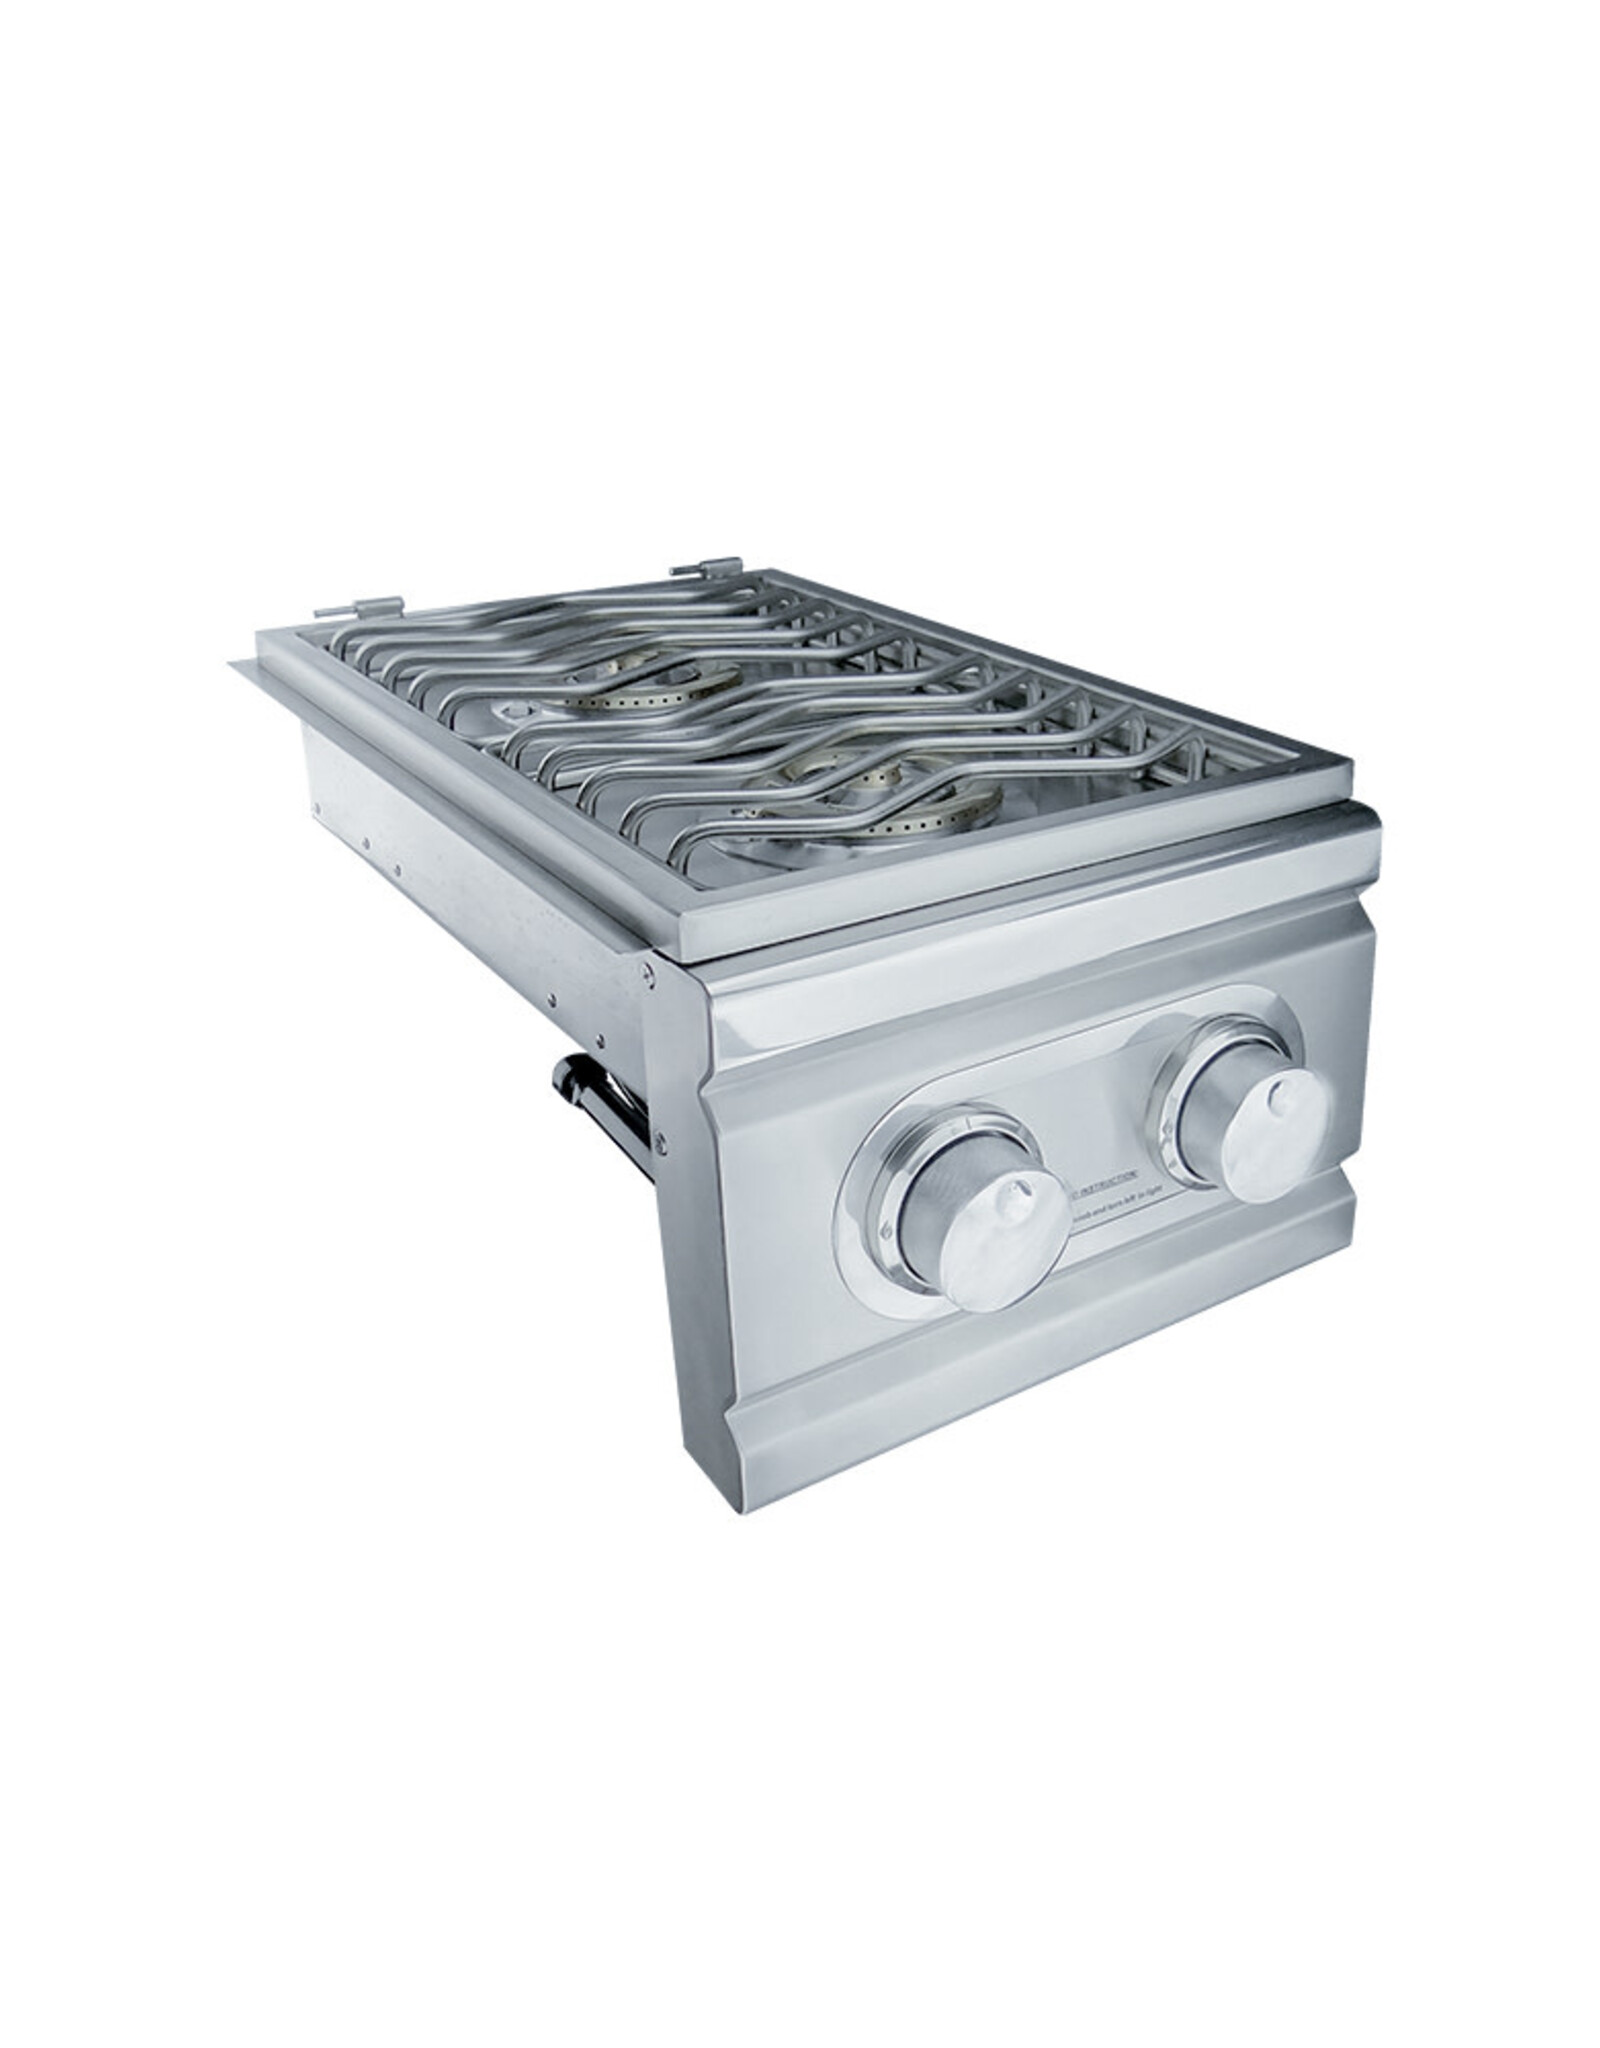 Renaissance Cooking Systems Renaissance Cooking Systems The Cutlass Series Double Side Burner - Natural Gas - RDB1